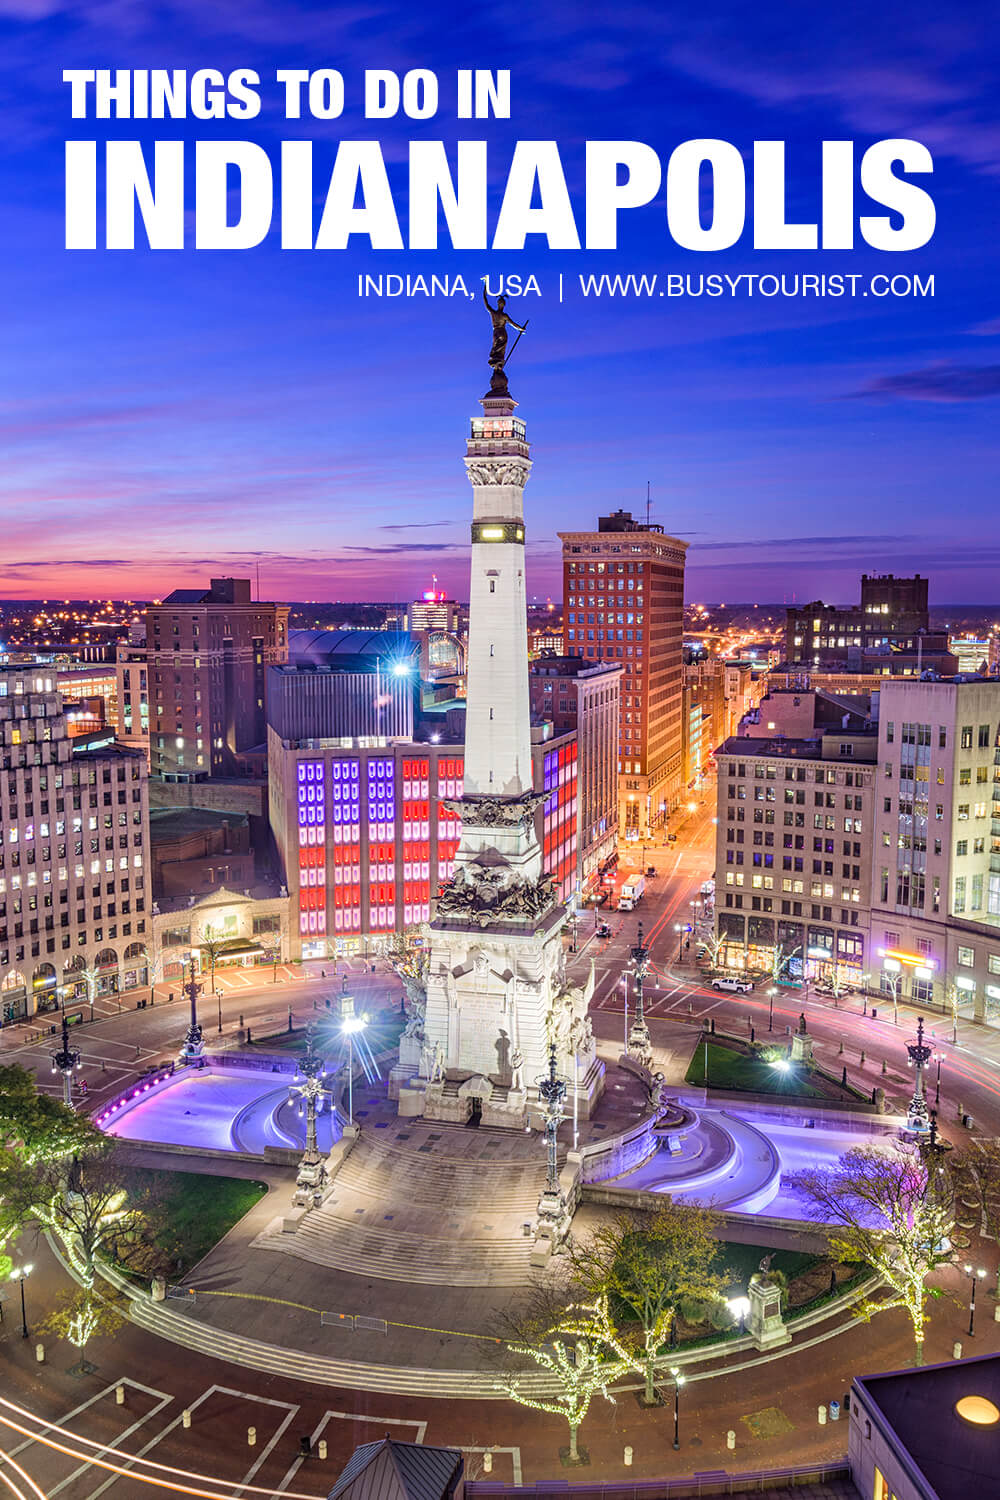 visit indiana events